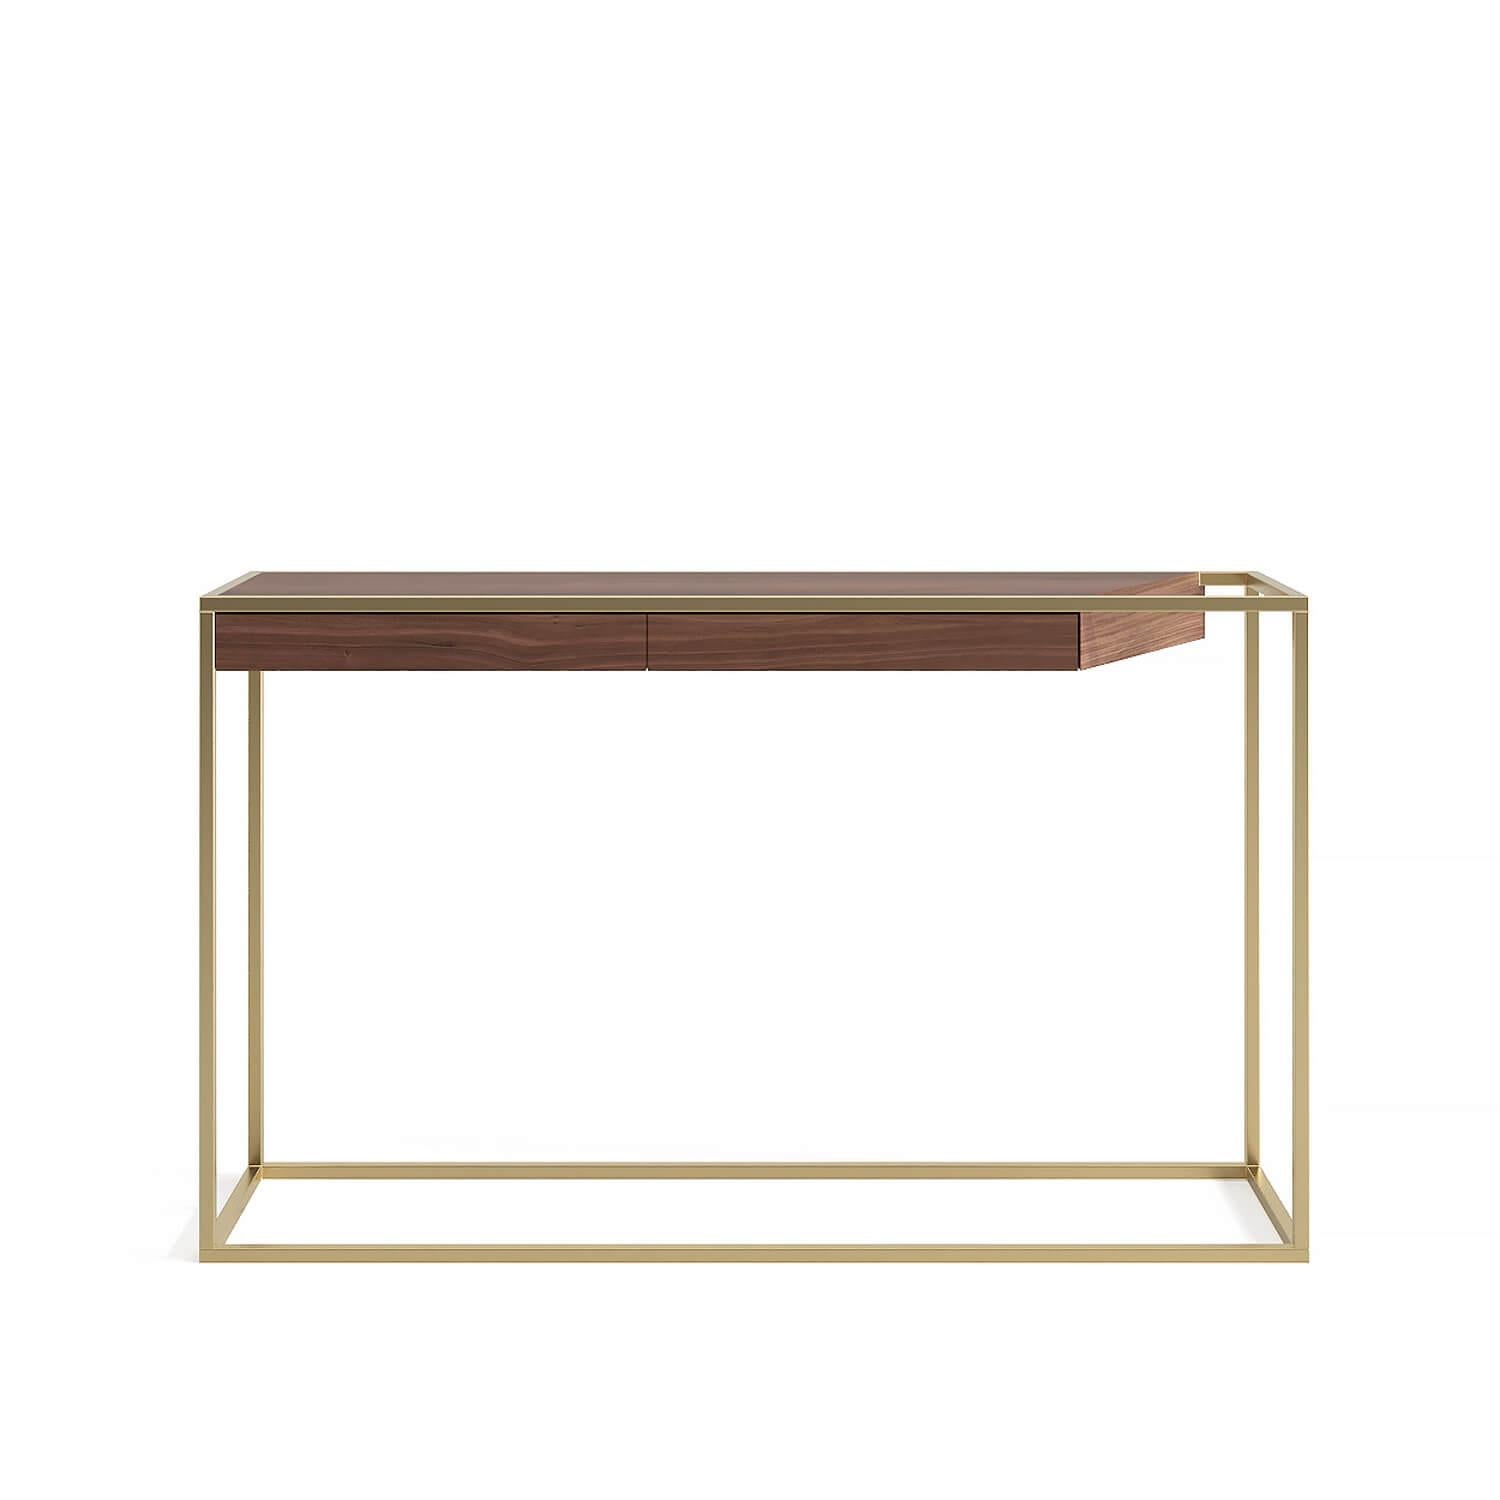 Modern Minimalist Rectangular Console Table Oak Wood and Brushed Stainless Steel For Sale 3